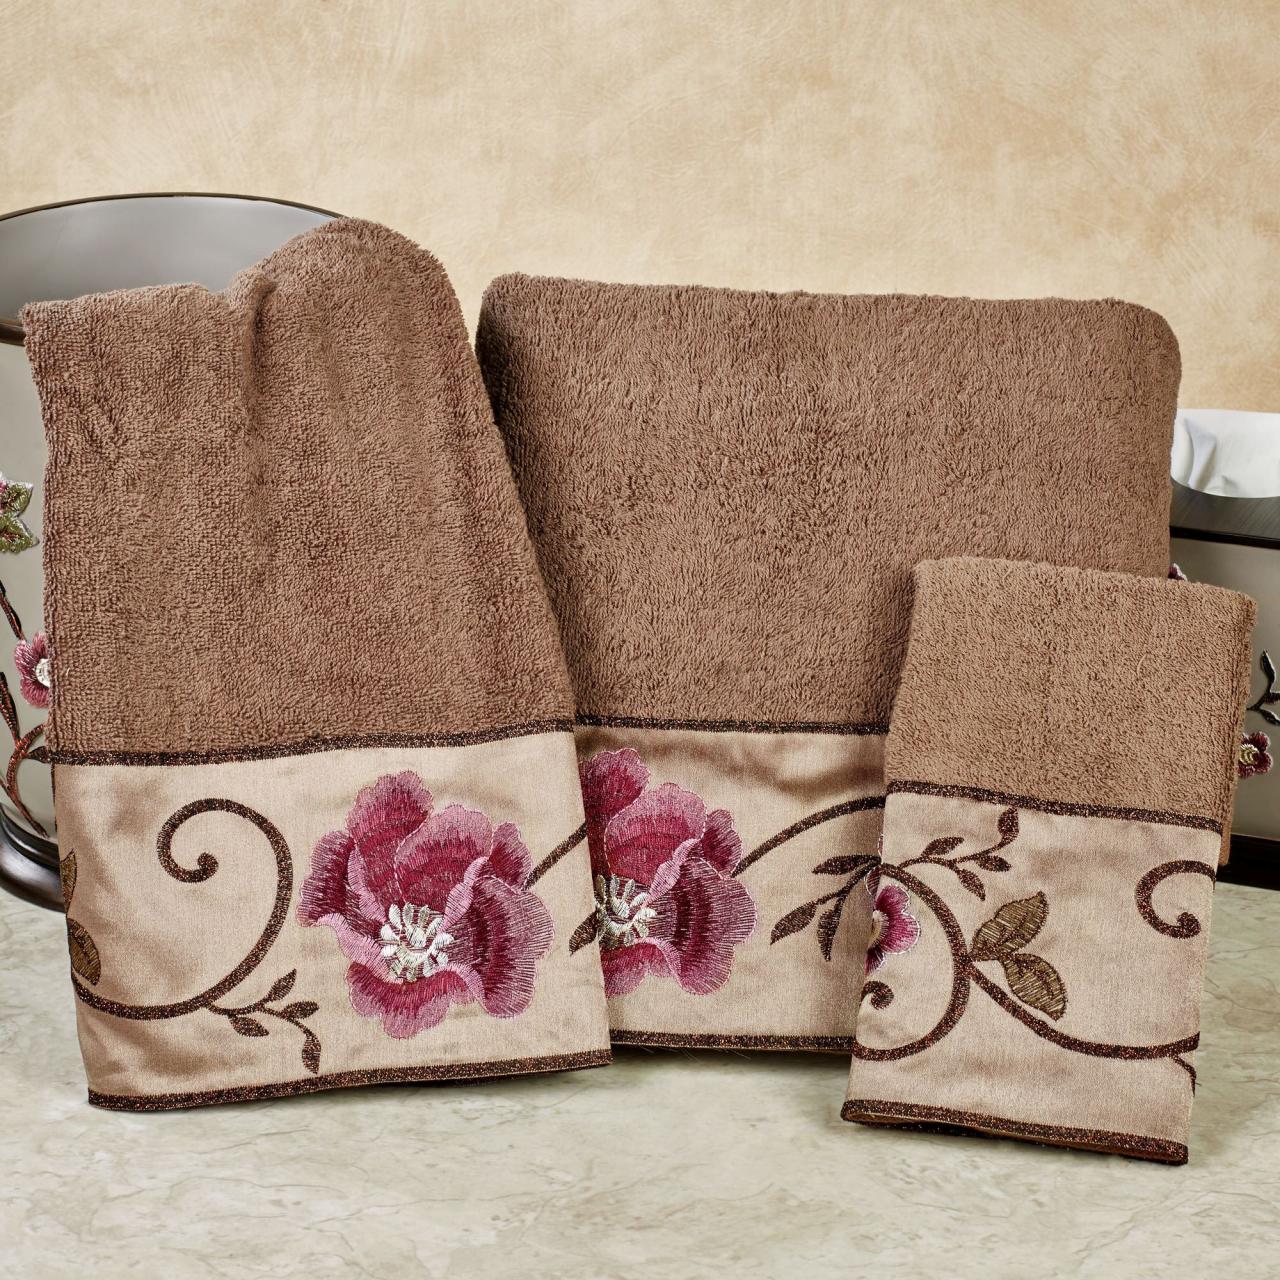 30 Fancy Decorative Bathroom towel Sets Home, Family, Style and Art Ideas